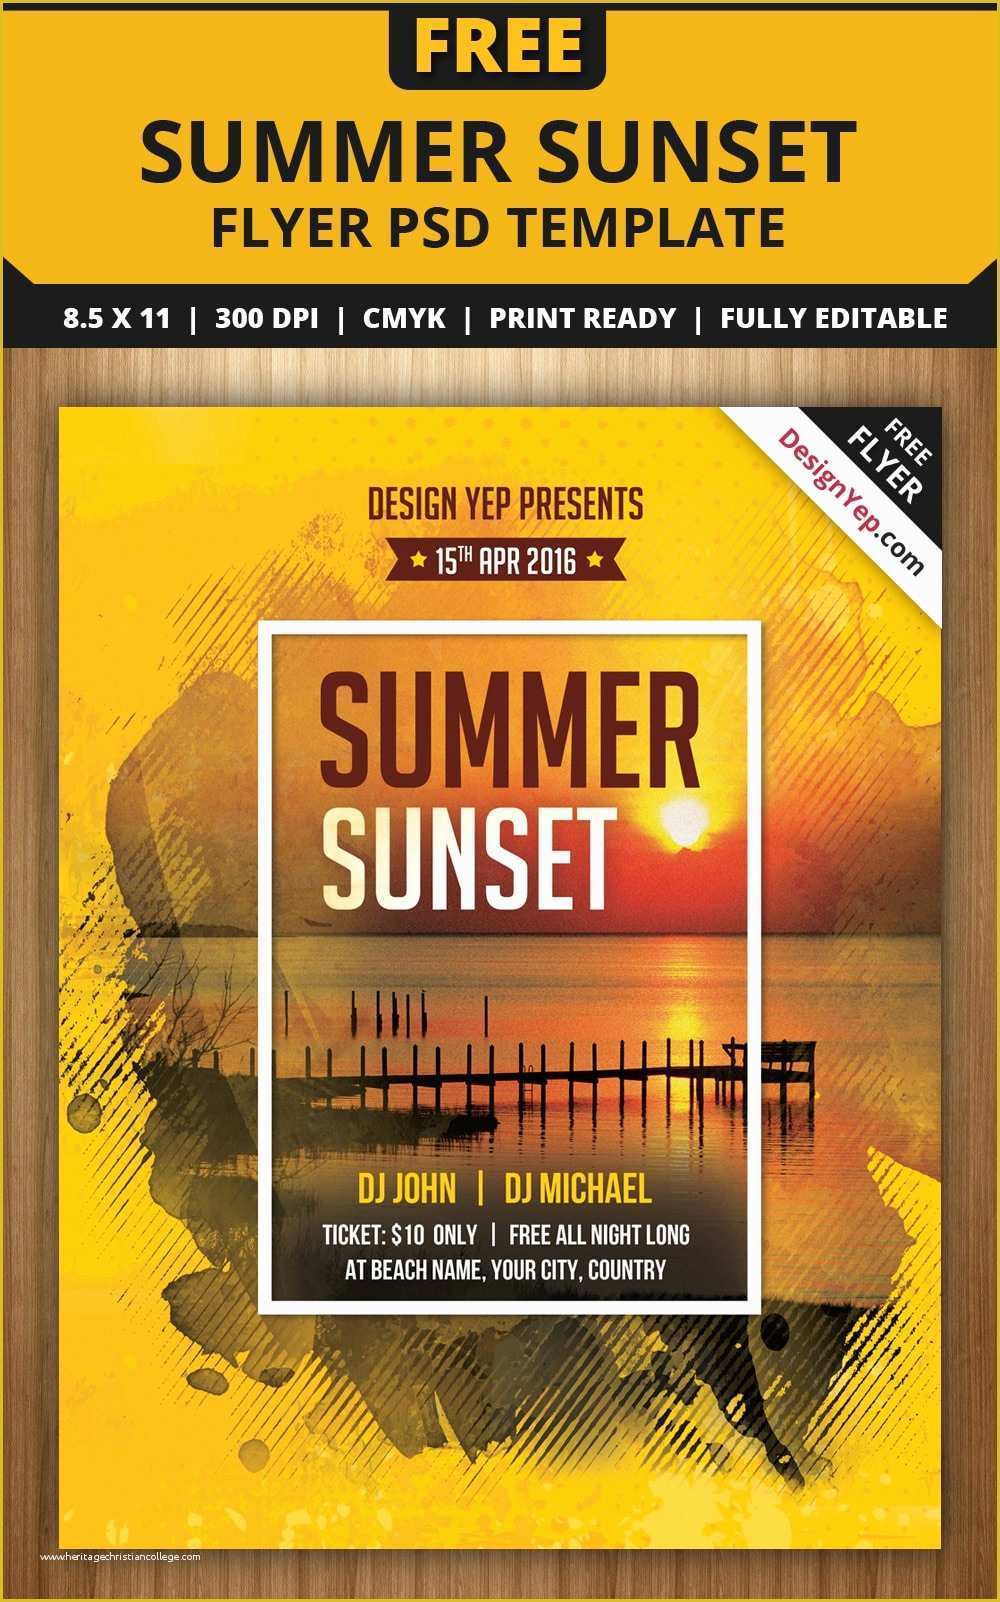 Event Poster Templates Free Of Free Flyer Templates Psd From 2016 Css Author